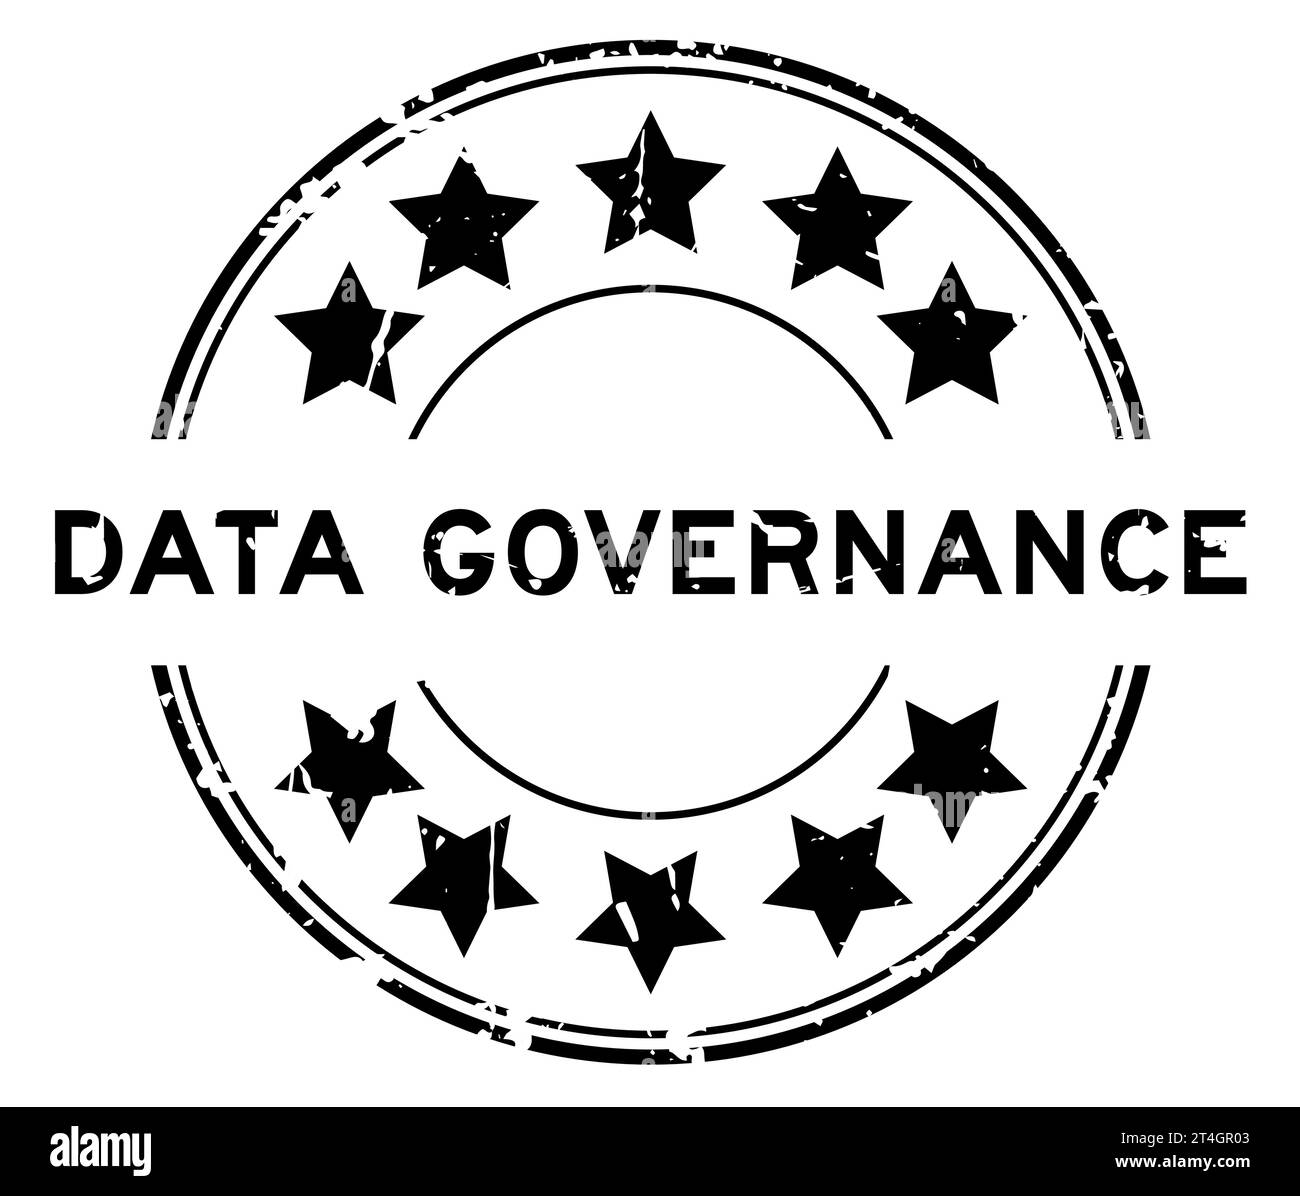 Grunge black word data governance with star icon round rubber seal stamp on white background Stock Vector